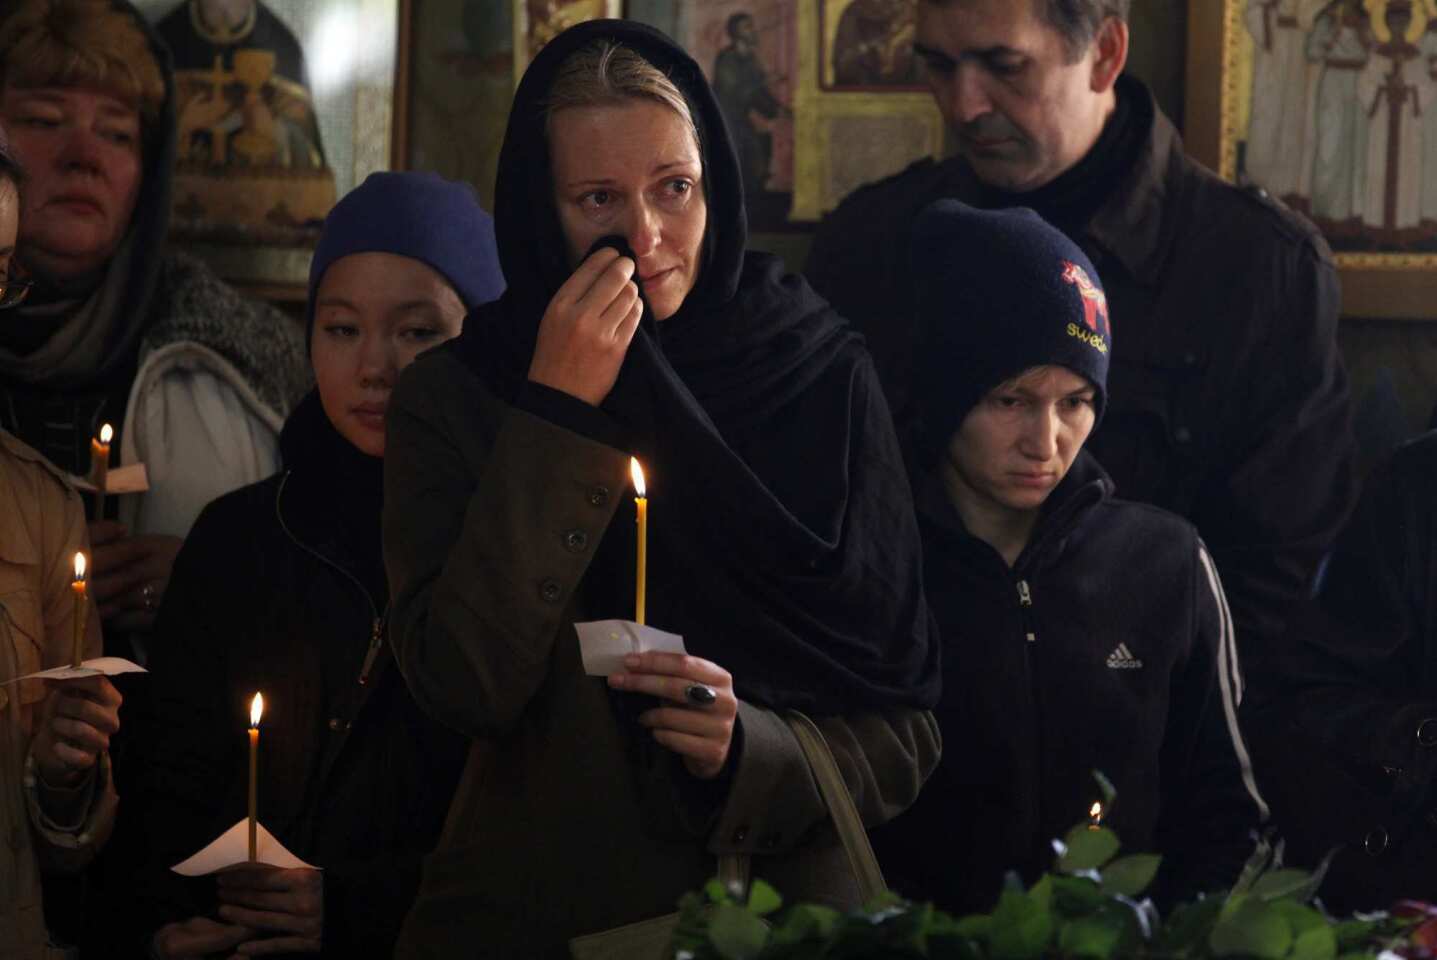 Mourners attend funeral services in Moscow for five teenagers killed by a suspected drunk driver.